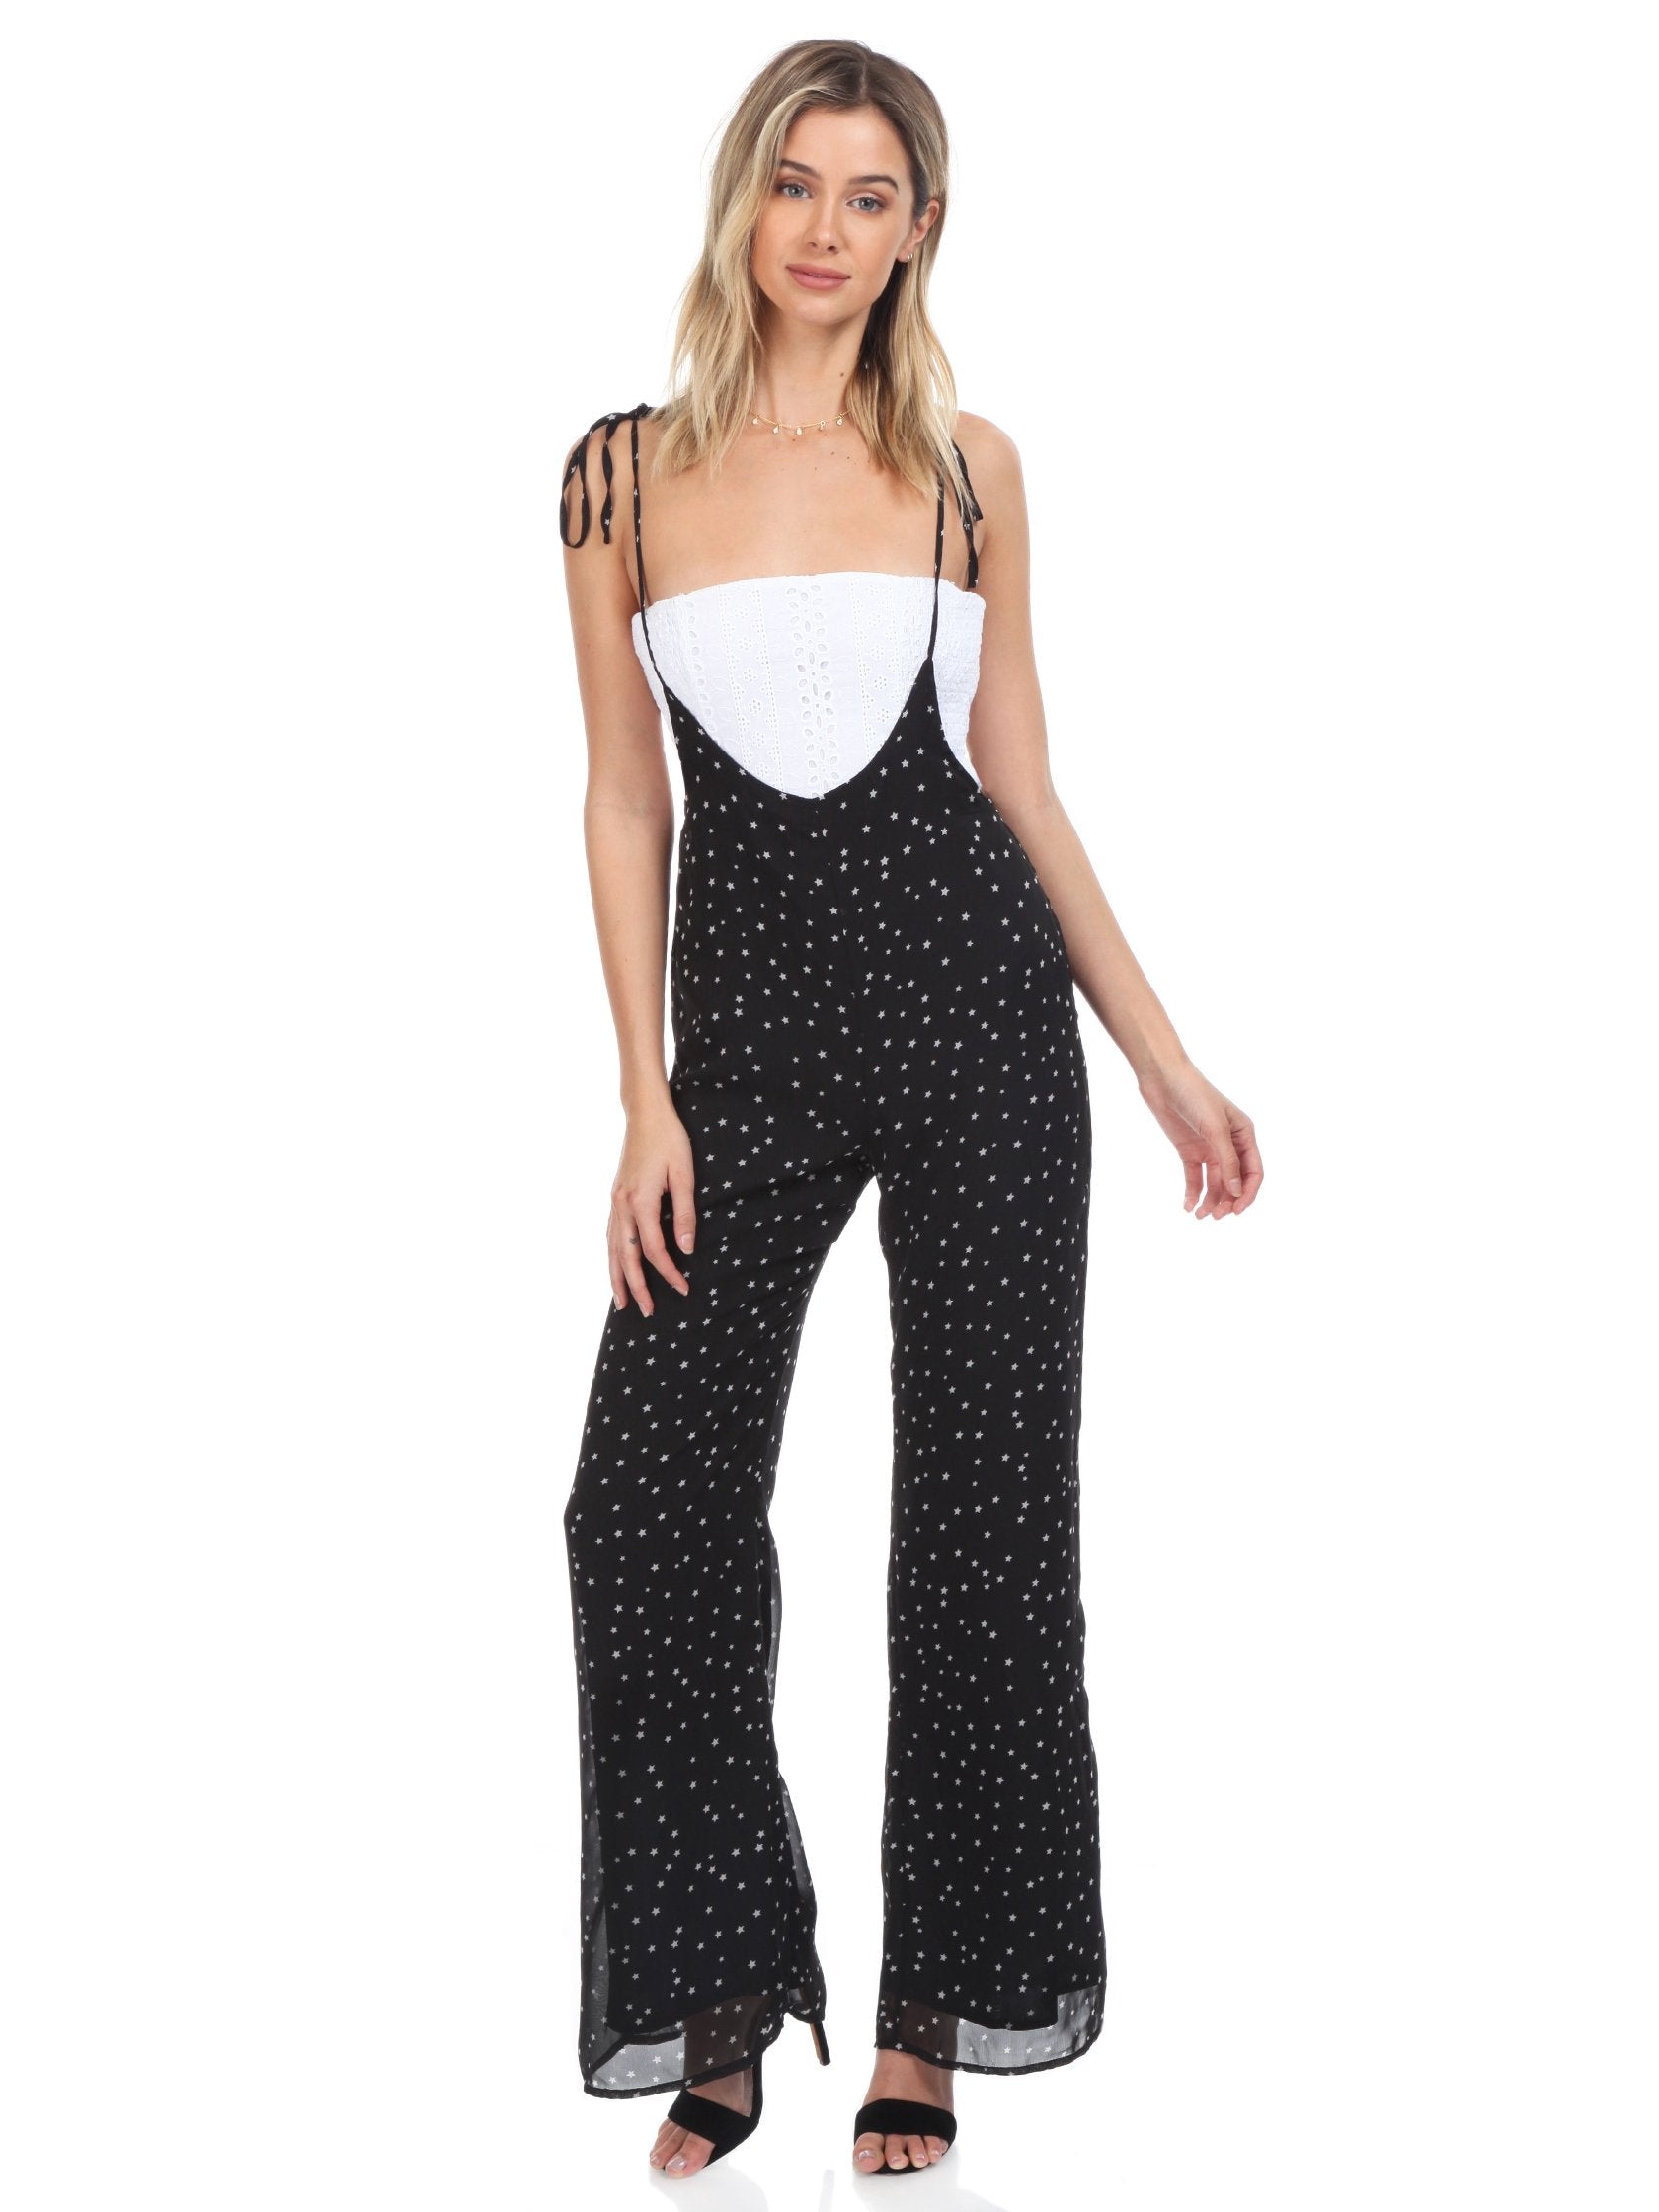 Girl outfit in a jumpsuit rental from FashionPass called Sasha Star Print Jumpsuit